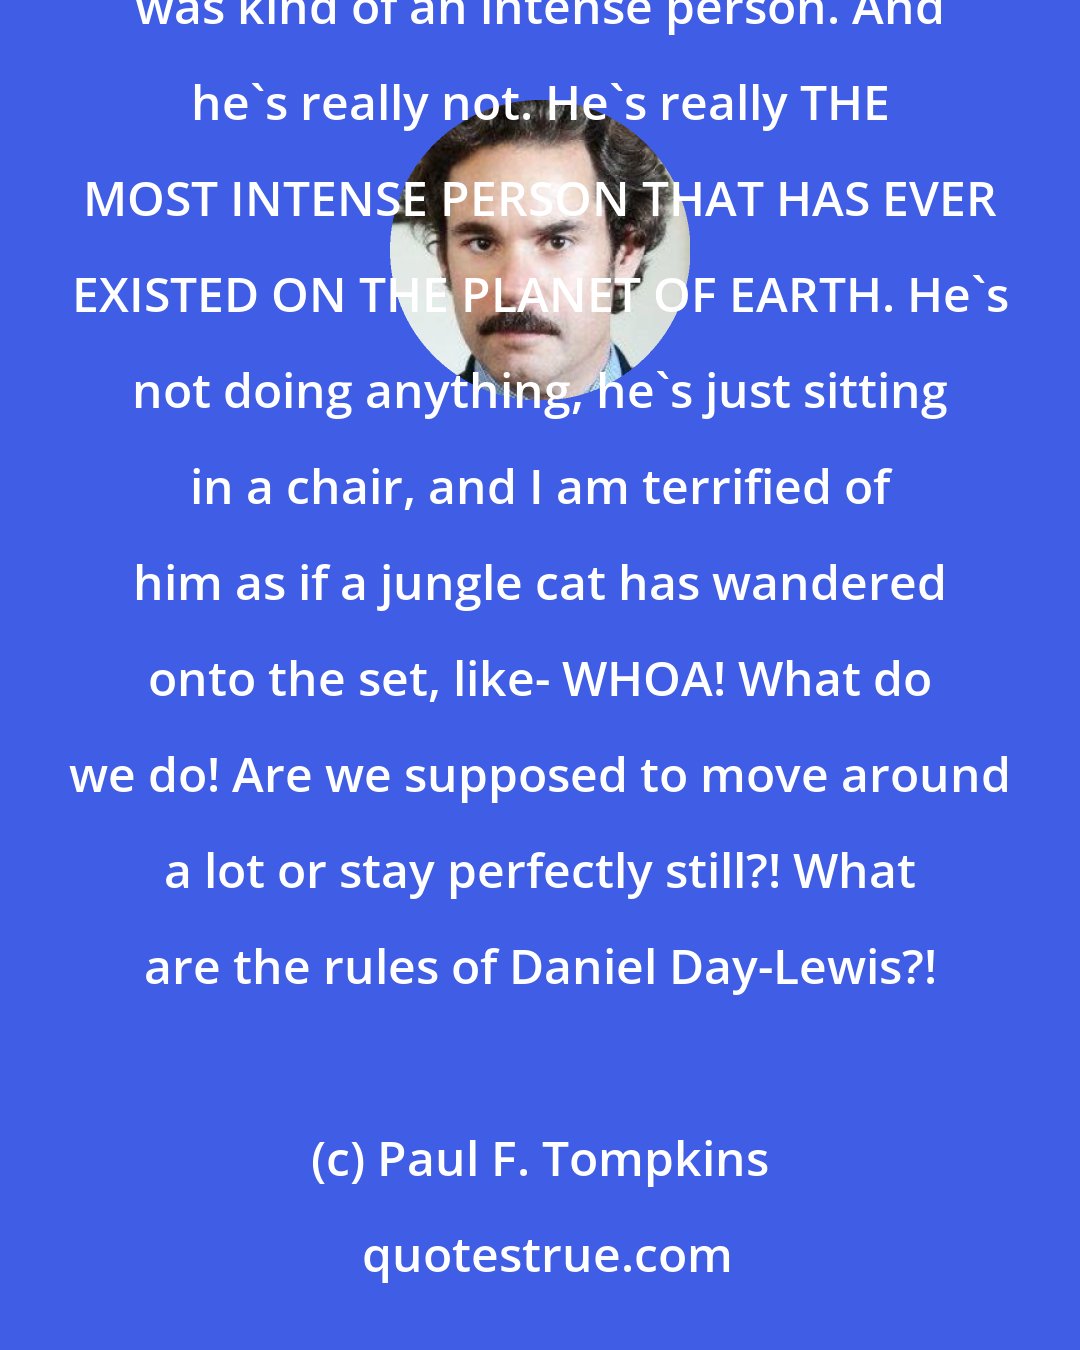 Paul F. Tompkins: I meet Daniel Day-Lewis. He's just sitting in a chair on the set. Now, I had been told that Daniel Day-Lewis was kind of an intense person. And he's really not. He's really THE MOST INTENSE PERSON THAT HAS EVER EXISTED ON THE PLANET OF EARTH. He's not doing anything, he's just sitting in a chair, and I am terrified of him as if a jungle cat has wandered onto the set, like- WHOA! What do we do! Are we supposed to move around a lot or stay perfectly still?! What are the rules of Daniel Day-Lewis?!